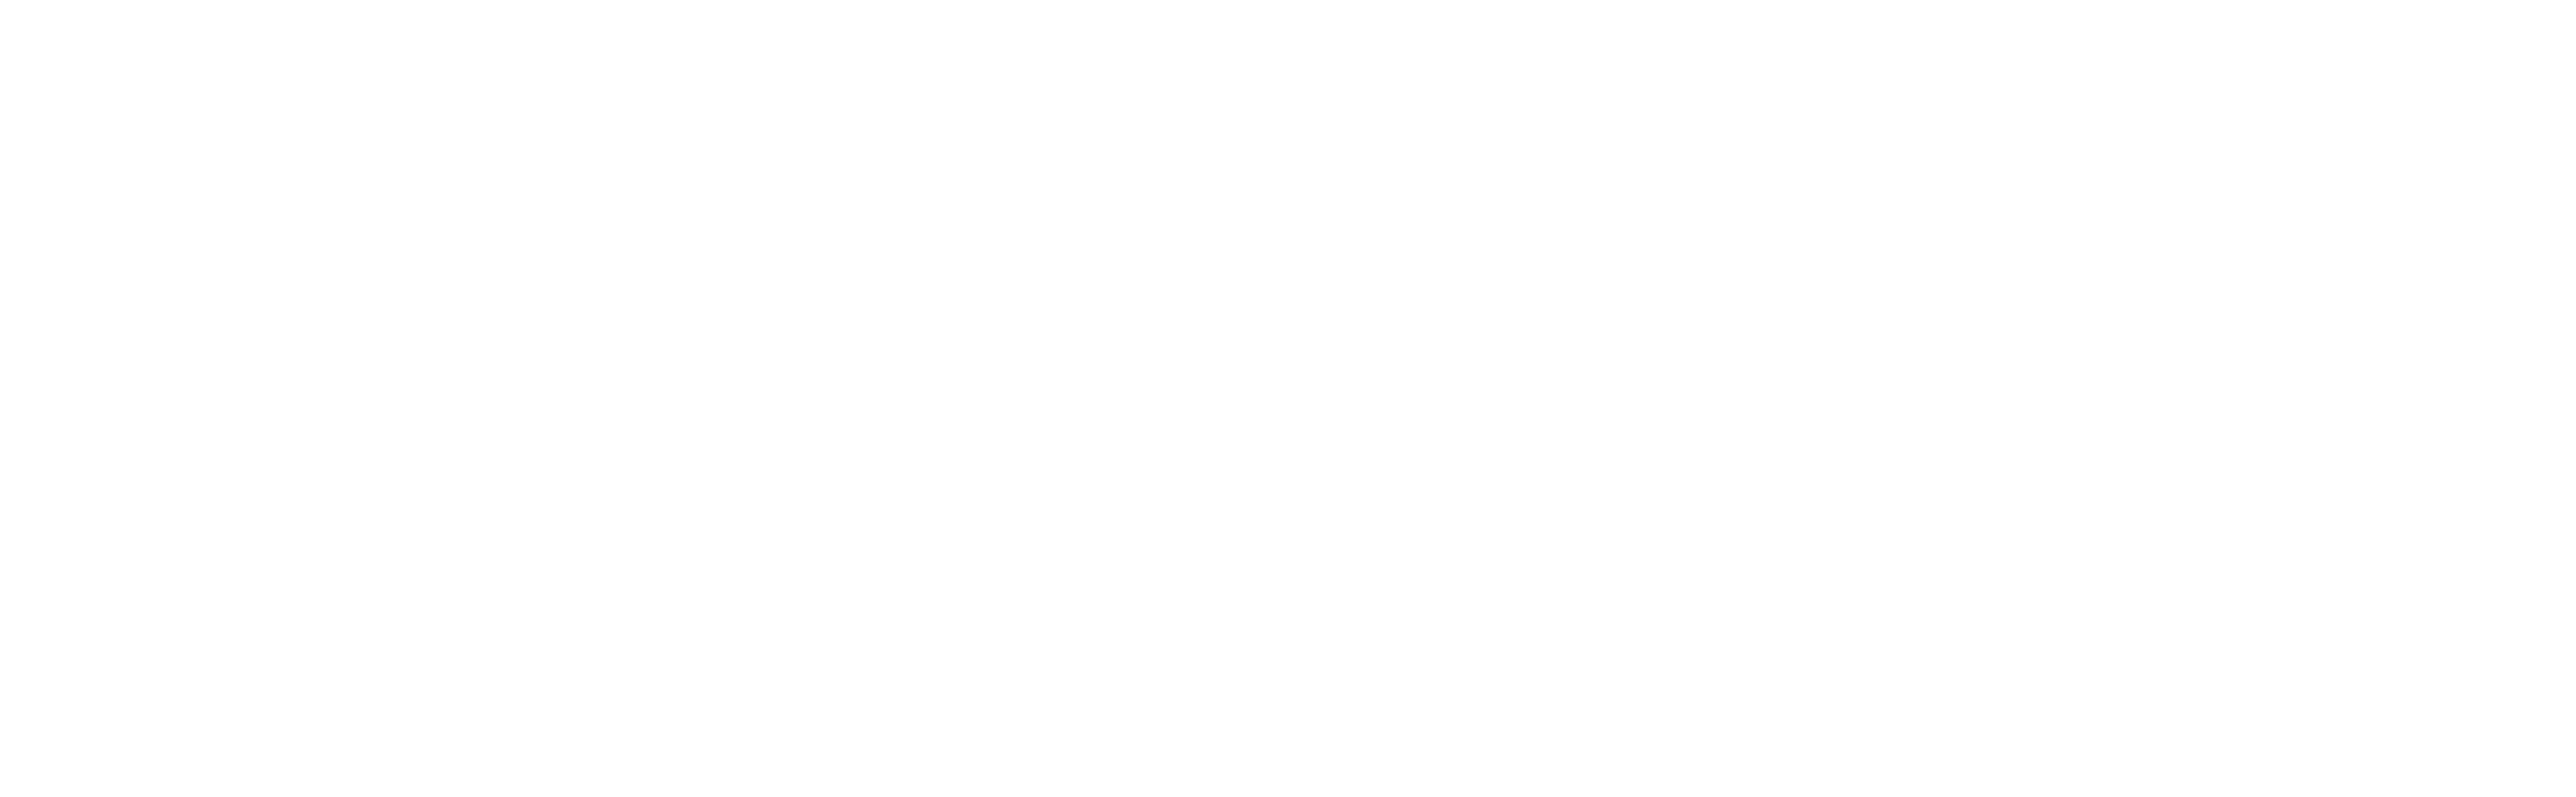 TTP Appointments Logo